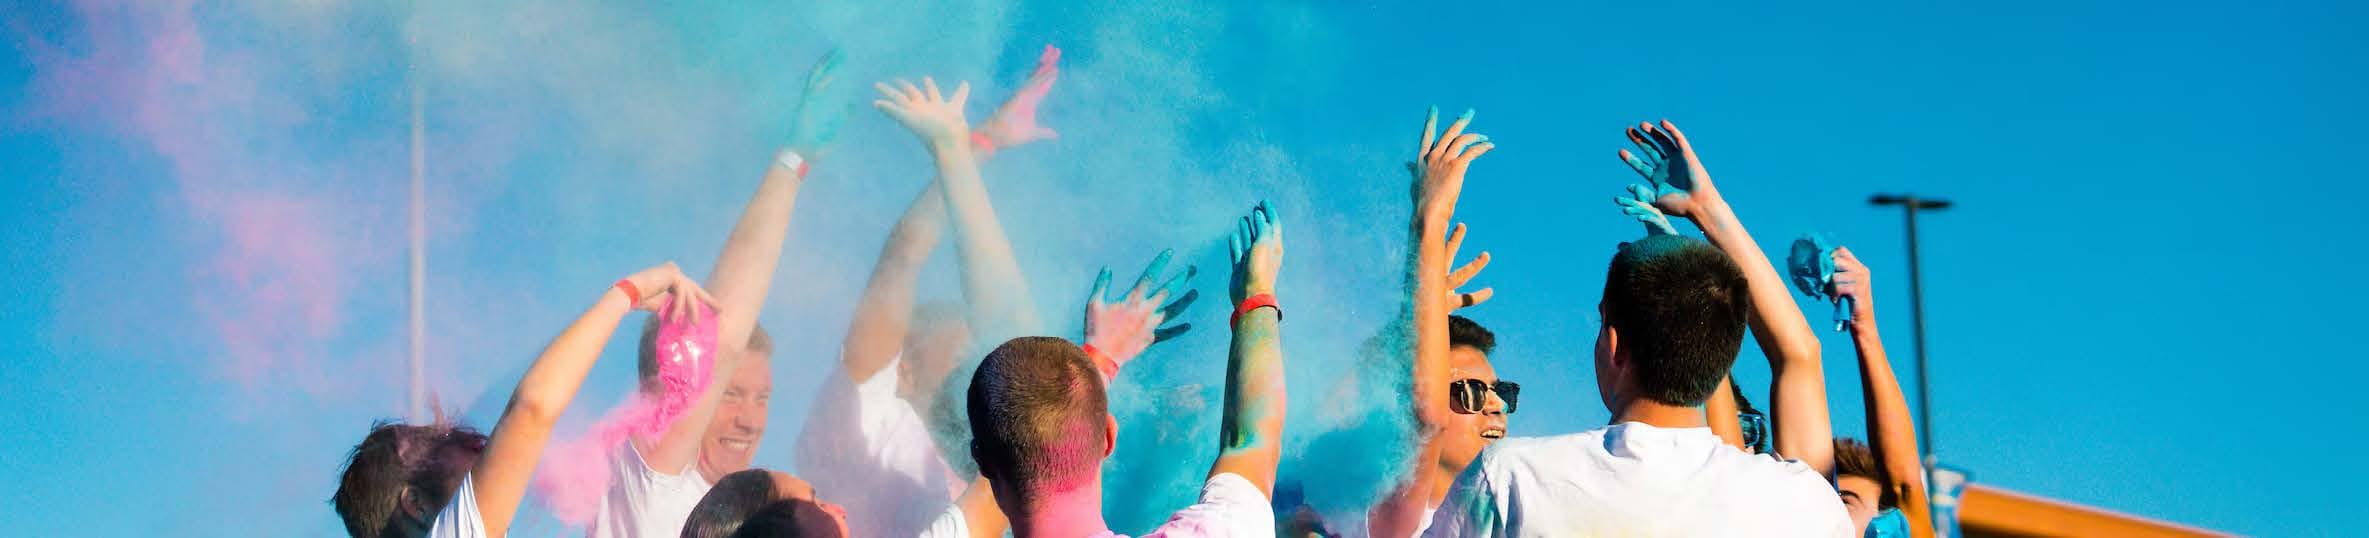 Students throwing colorful powder into the air.